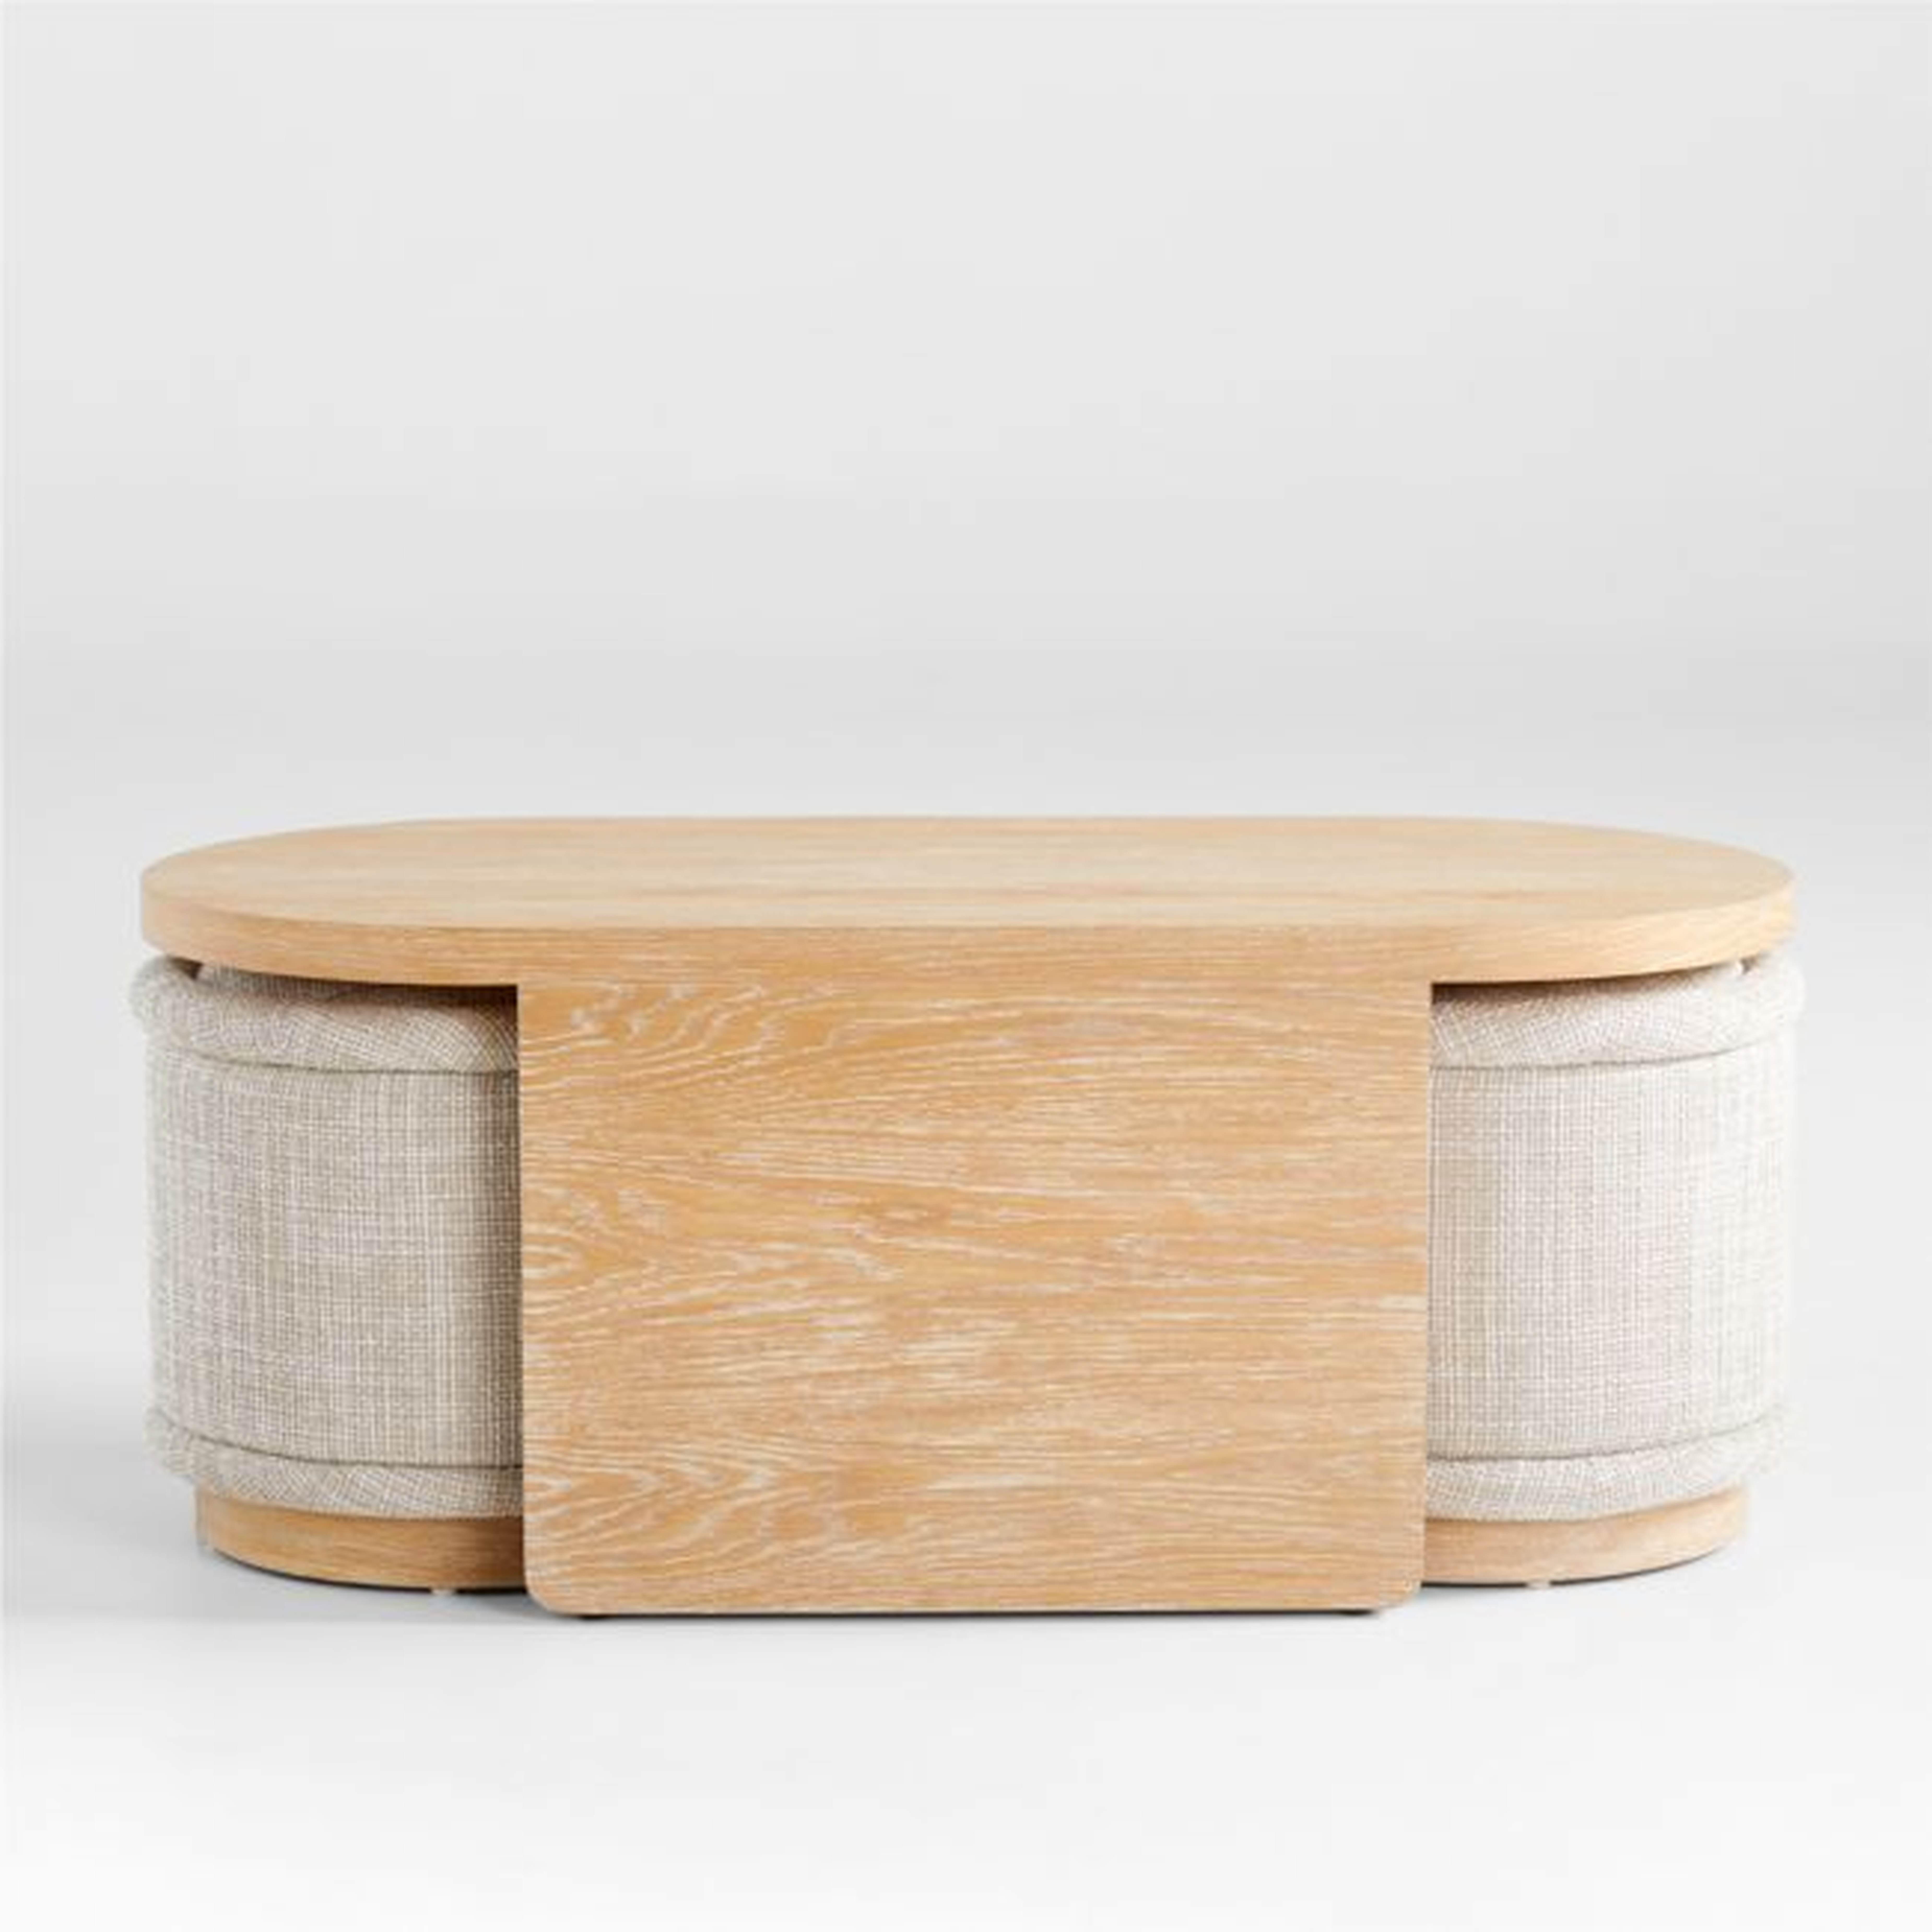 Union Oval Nesting Coffee Table with Stools - Crate and Barrel